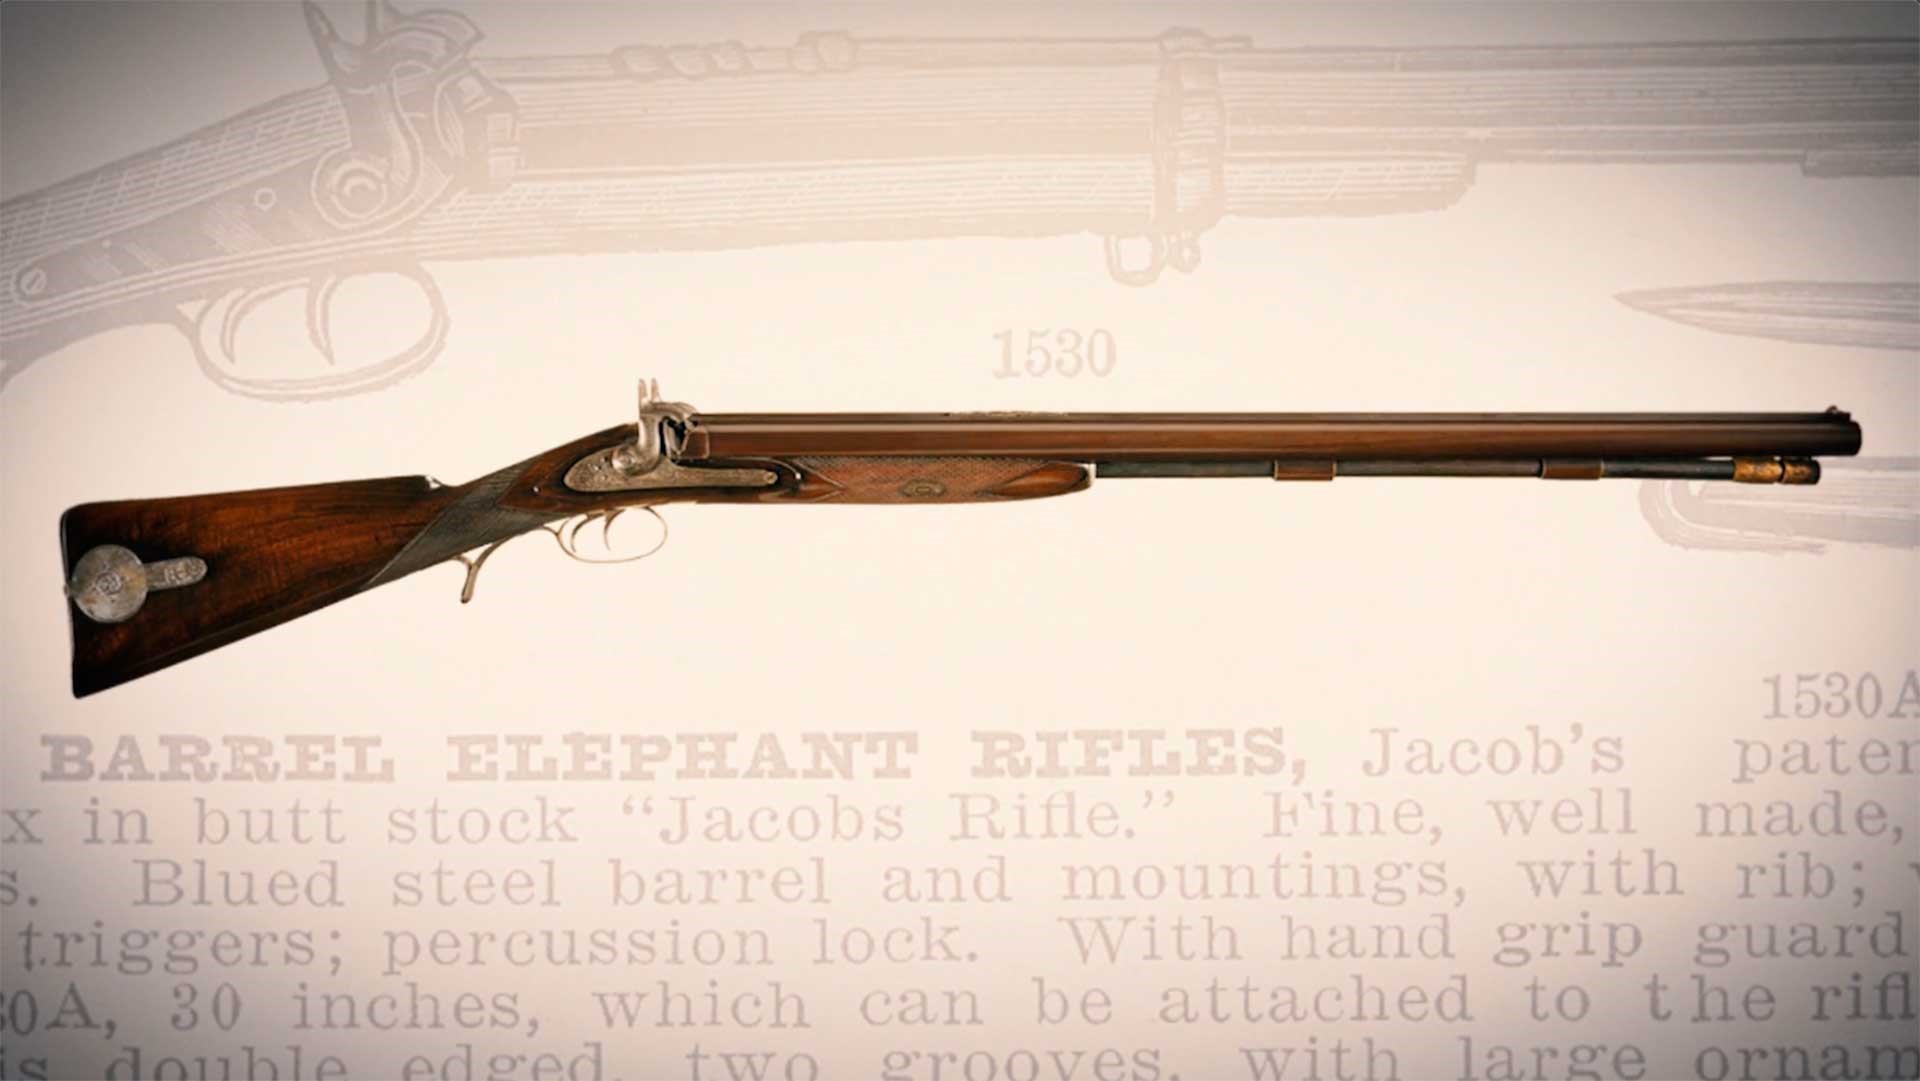 Right side of the Jacob Double Rifle on an antique text overlay.